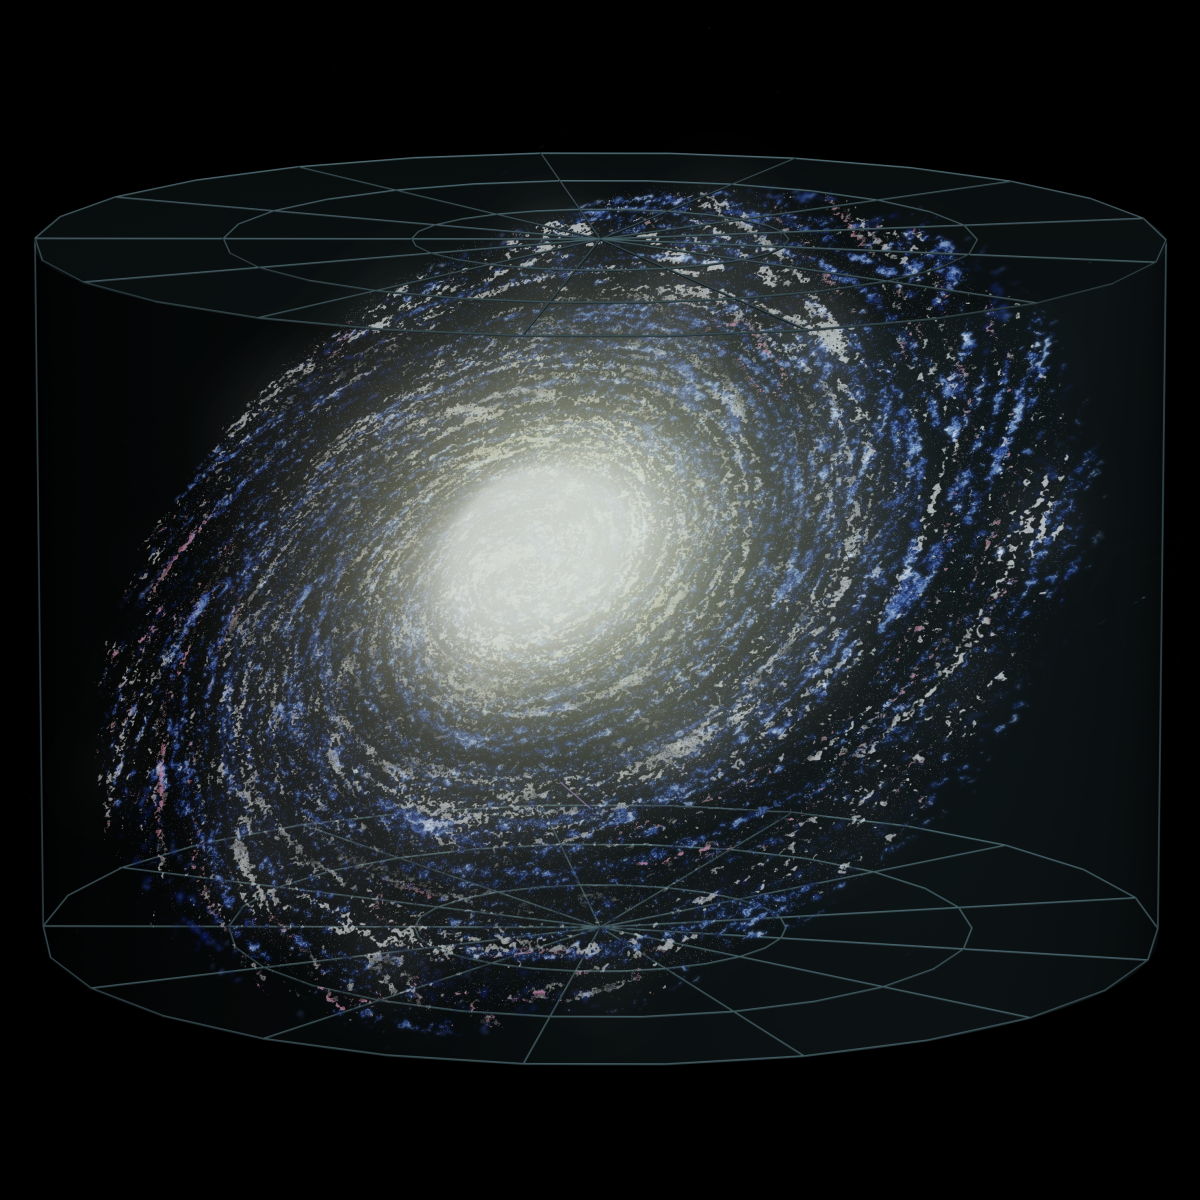 Artist's impression of the Milky Way: the stars are collapsed into a flat disc